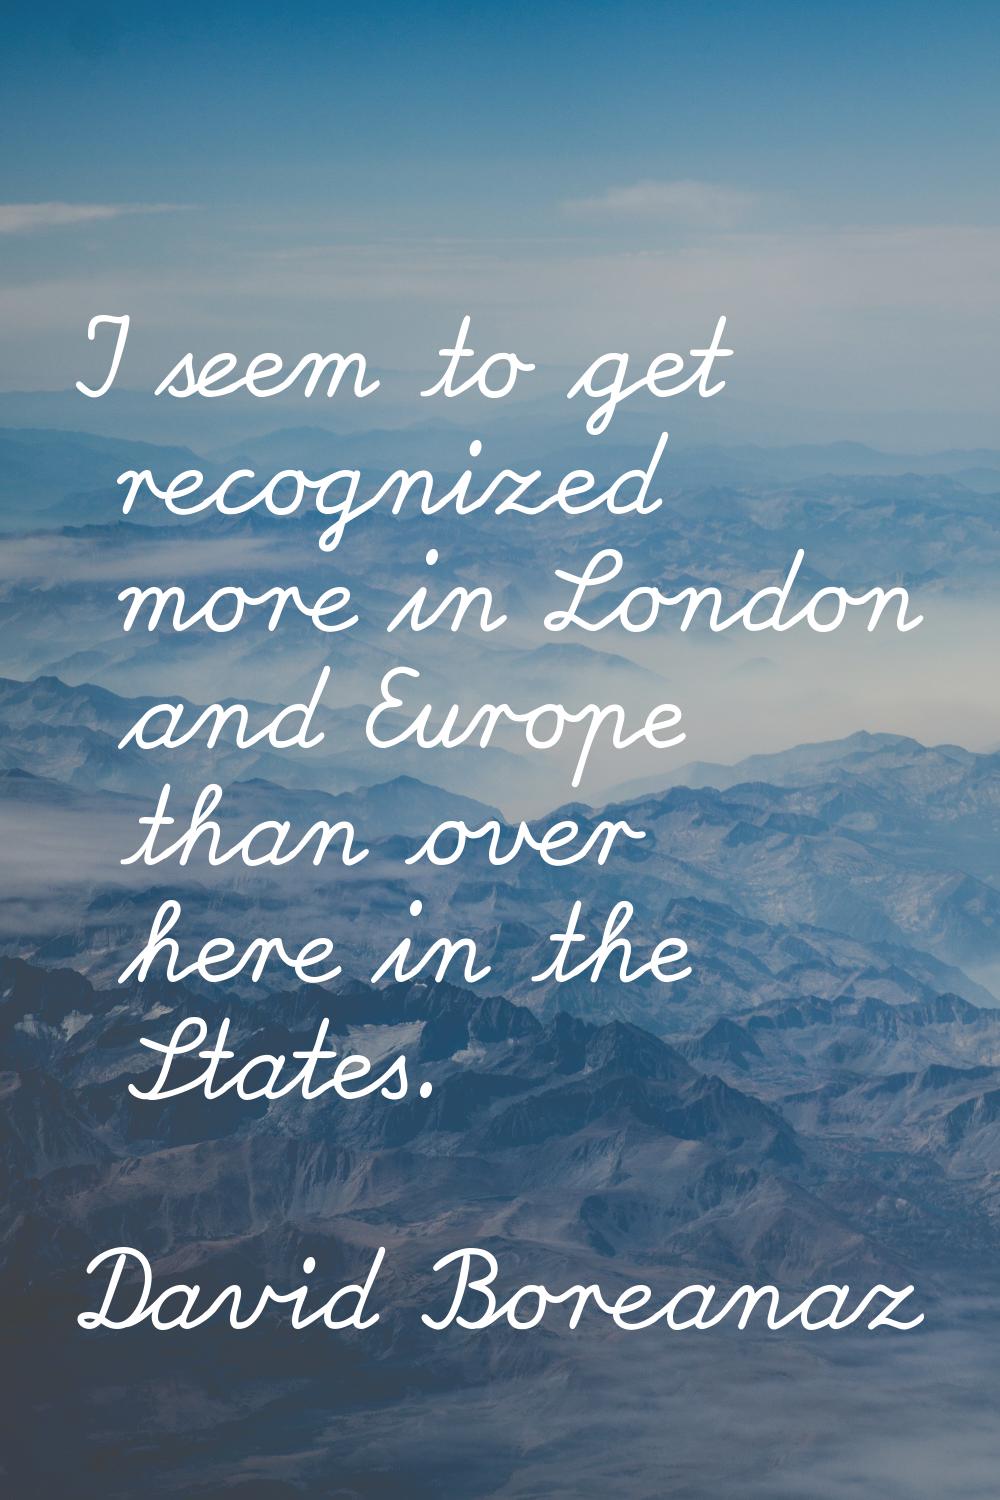 I seem to get recognized more in London and Europe than over here in the States.